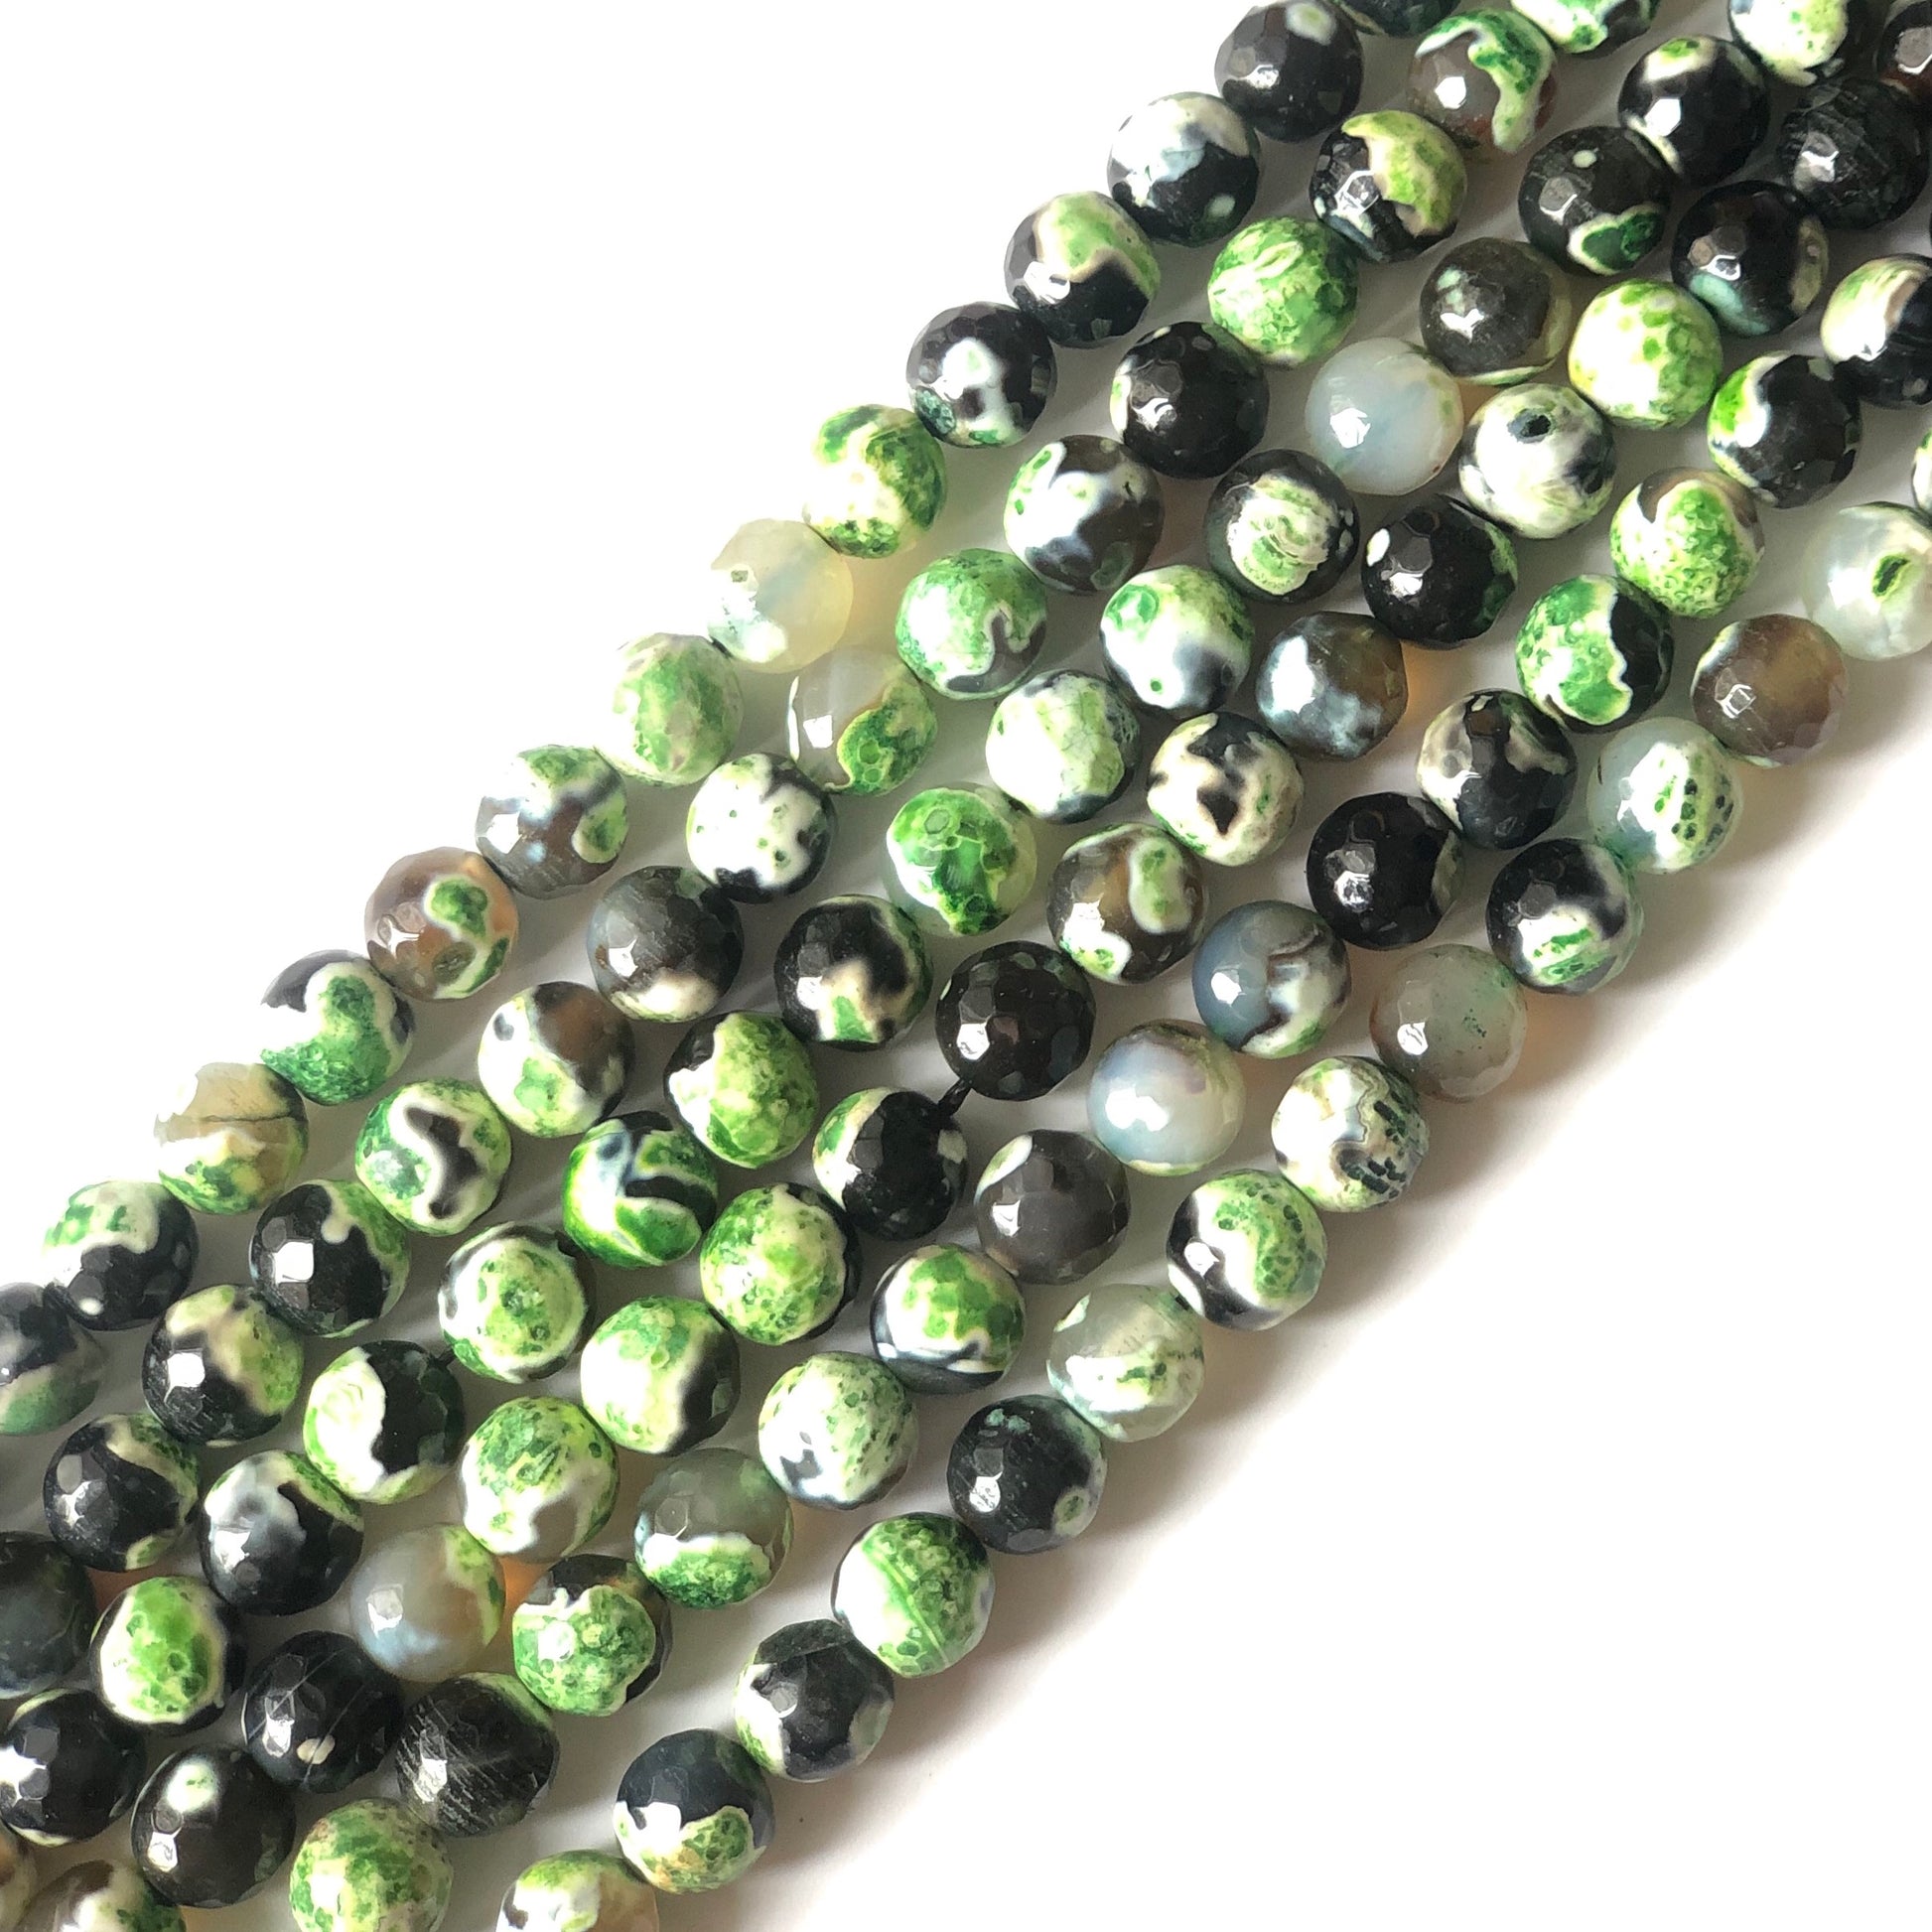 2 Strands/lot 10mm Green Faceted Fire Agate Stone Beads Stone Beads Faceted Agate Beads Charms Beads Beyond